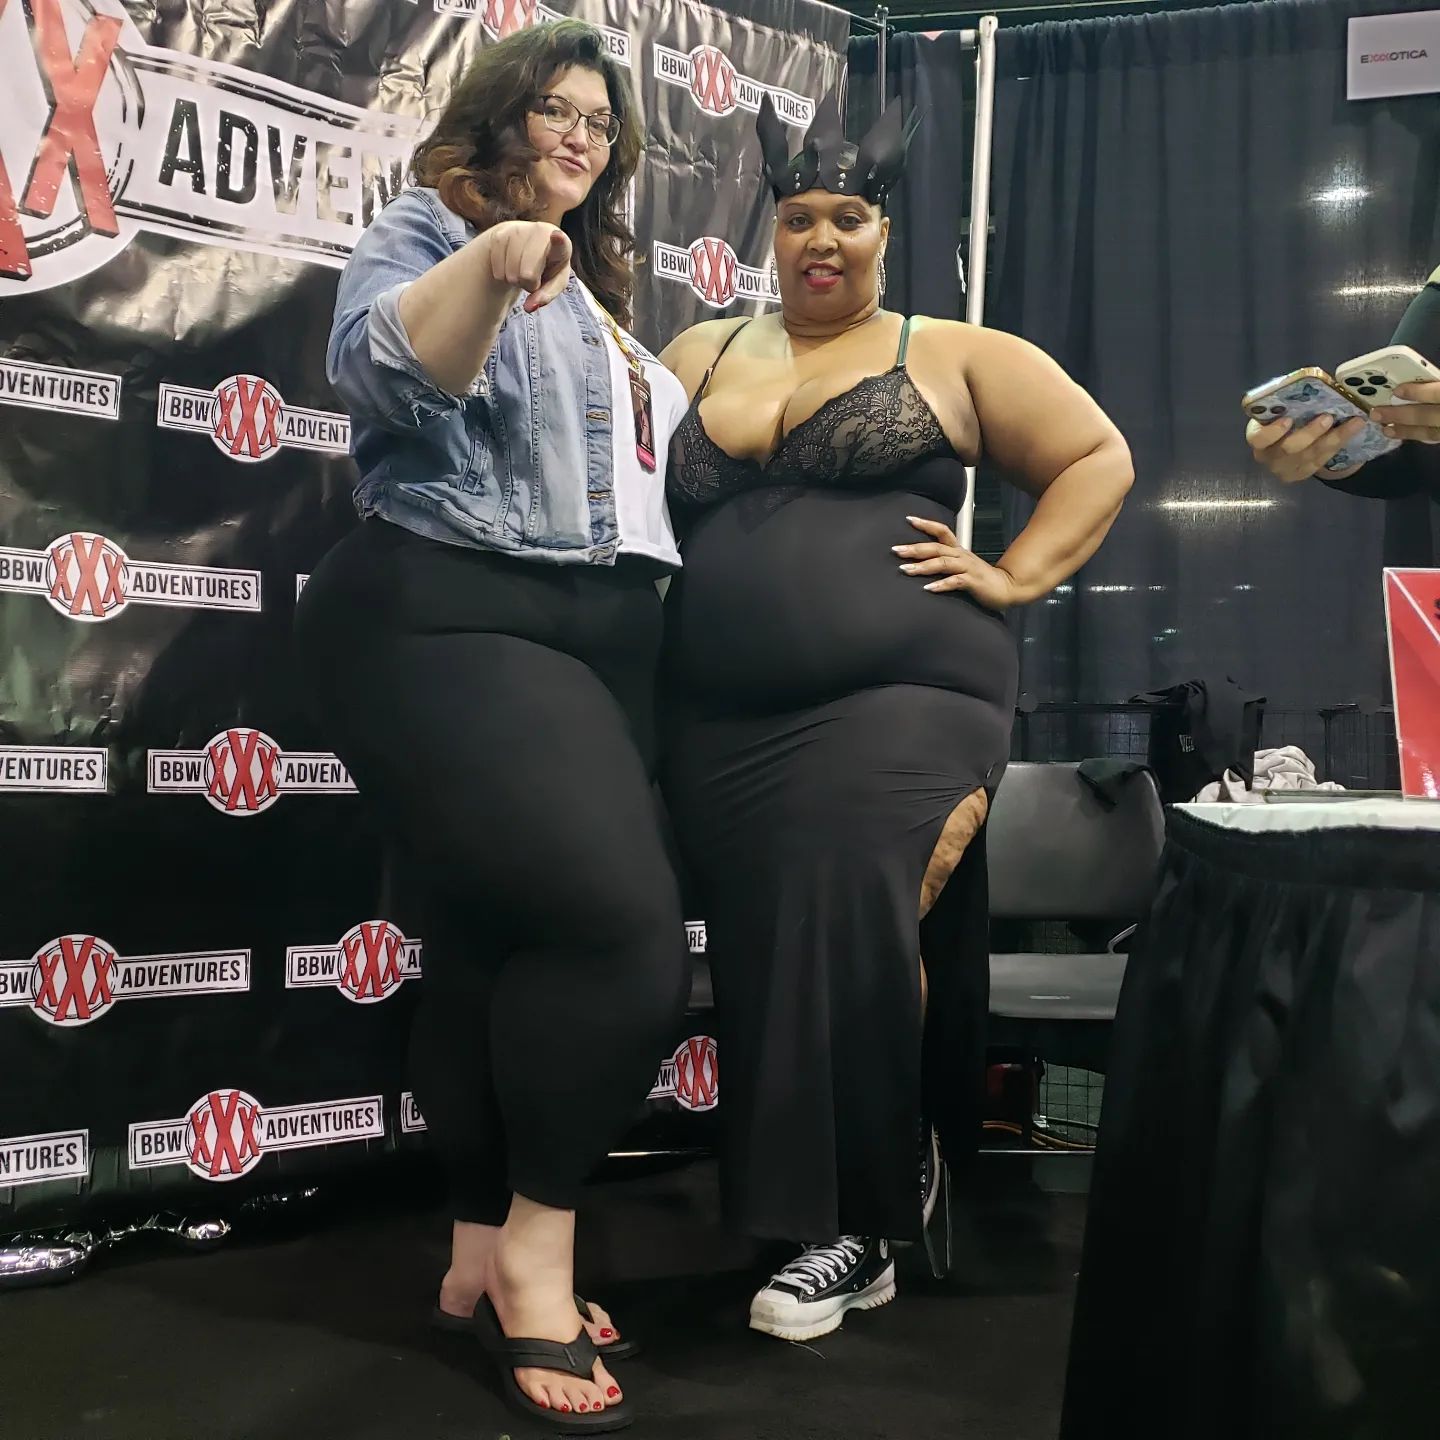 While at Chicago Exxxotica,  had the privilege of witnessing a scene done by @house_zuyaa_inc ... super Hot and Sexy is an understatement.  Female domination on Full display.  Sadly the video is just toooo hot for IG regulations,  soooo you'll just have to hop over and give a follow.